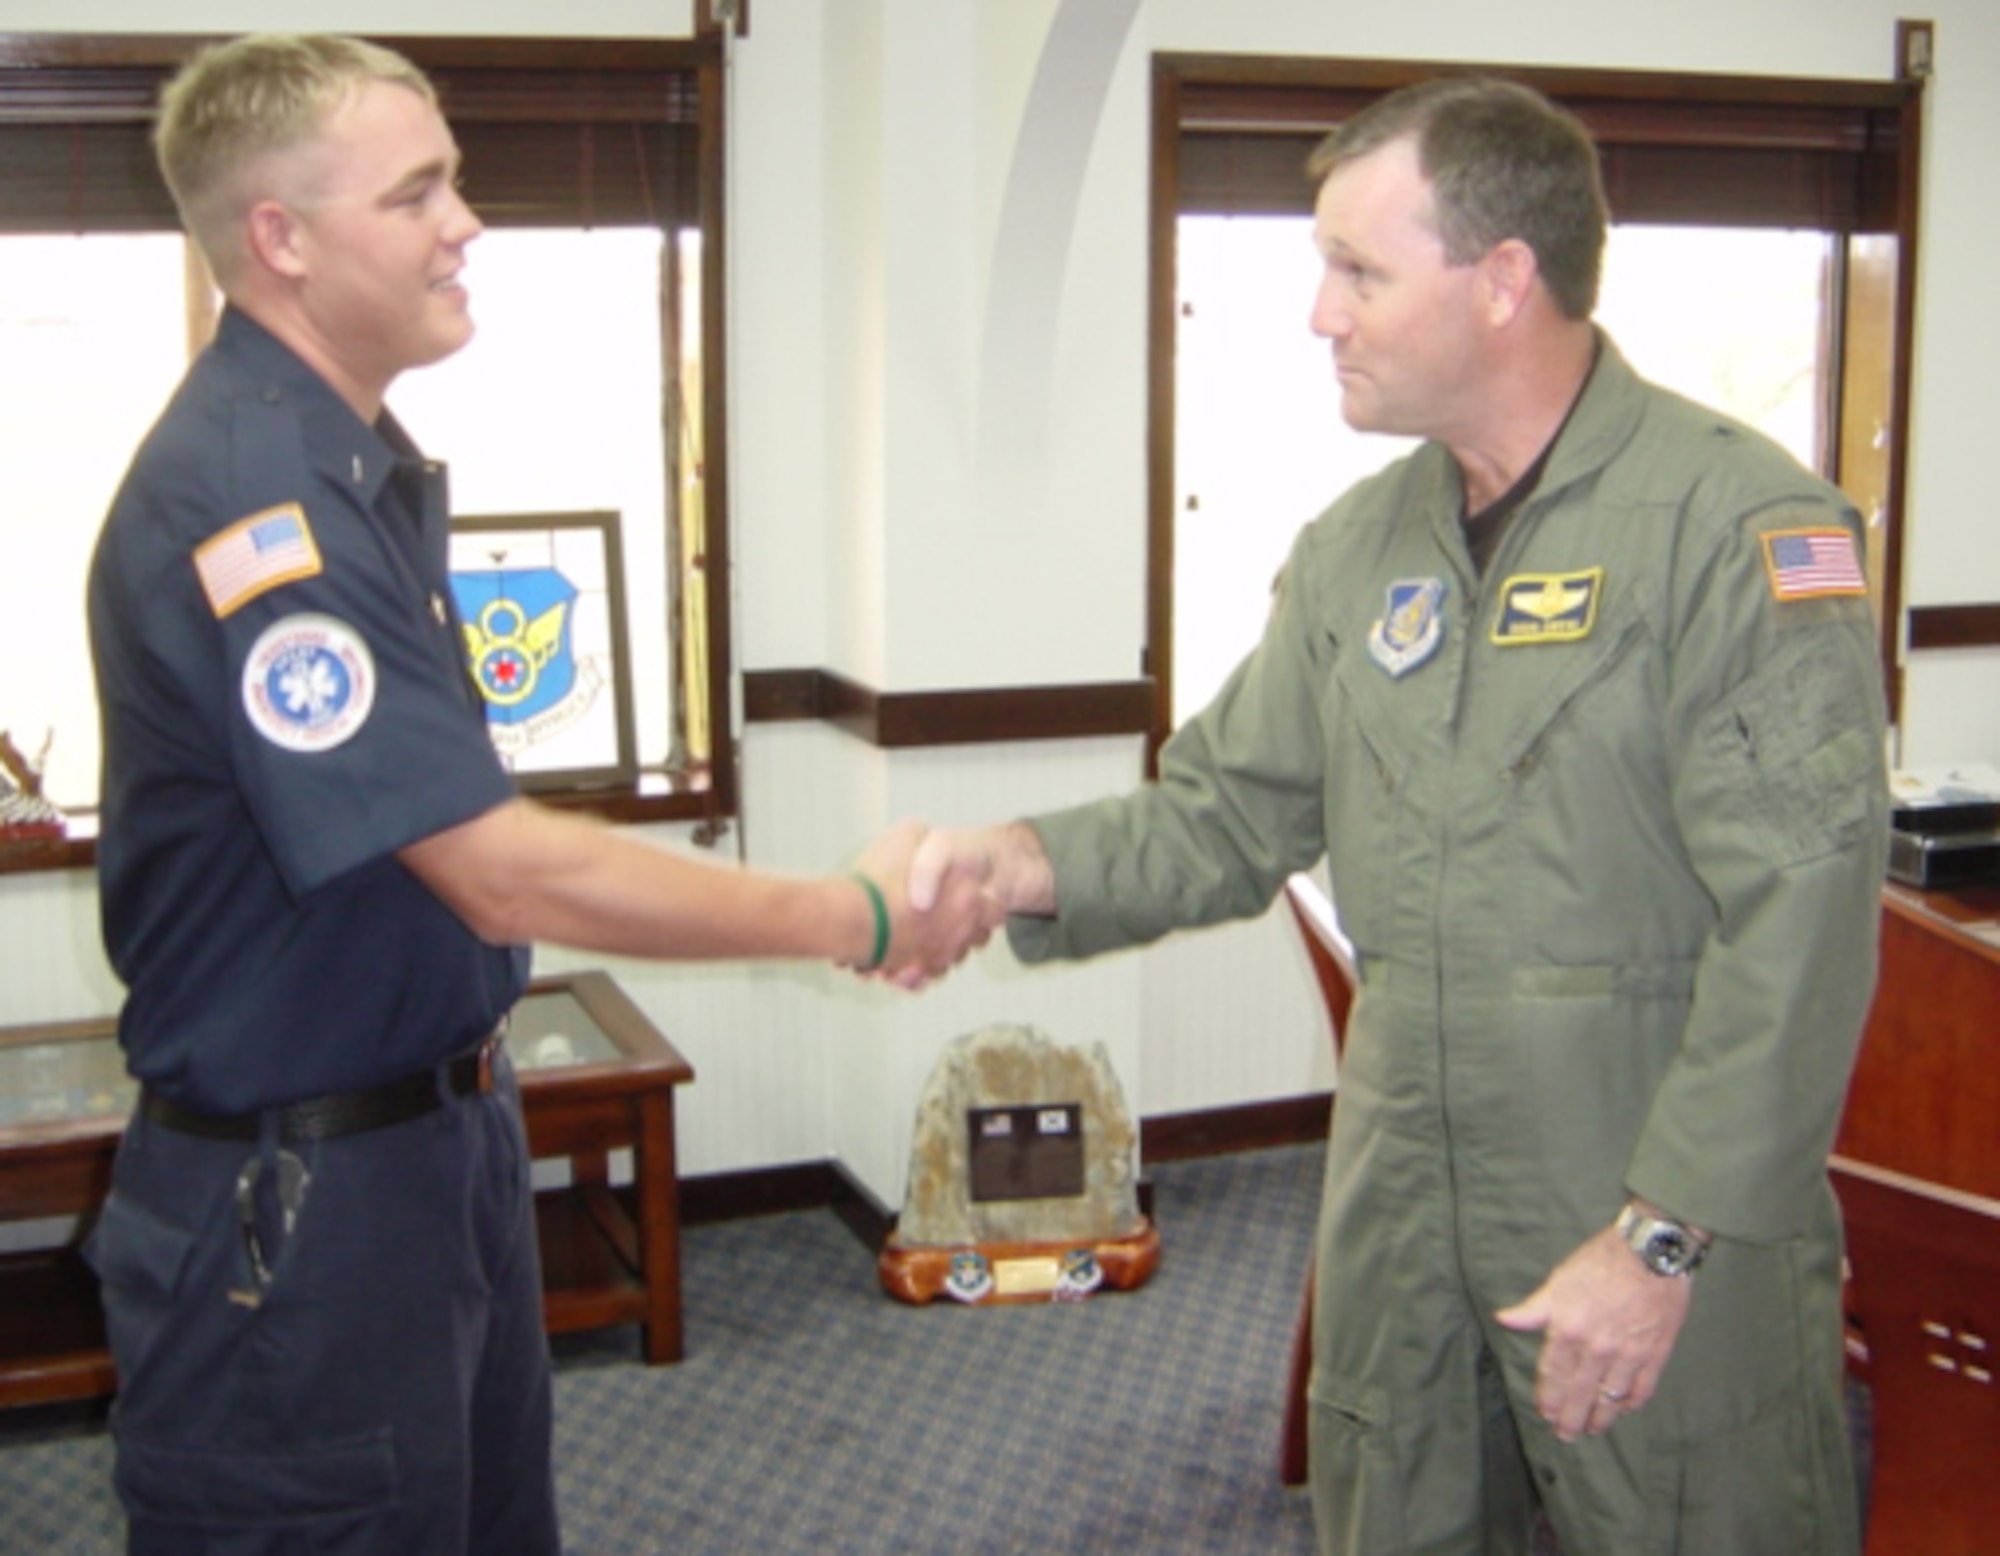 Brig. Gen. Douglas Owens, 36th Wing commander, presents William O’Meara with a coin from Michael Wynne, Secretary of the Air Force. O’Meara briefed Secretary Wynne on the fire station’s confined space program. (Courtesy photo)